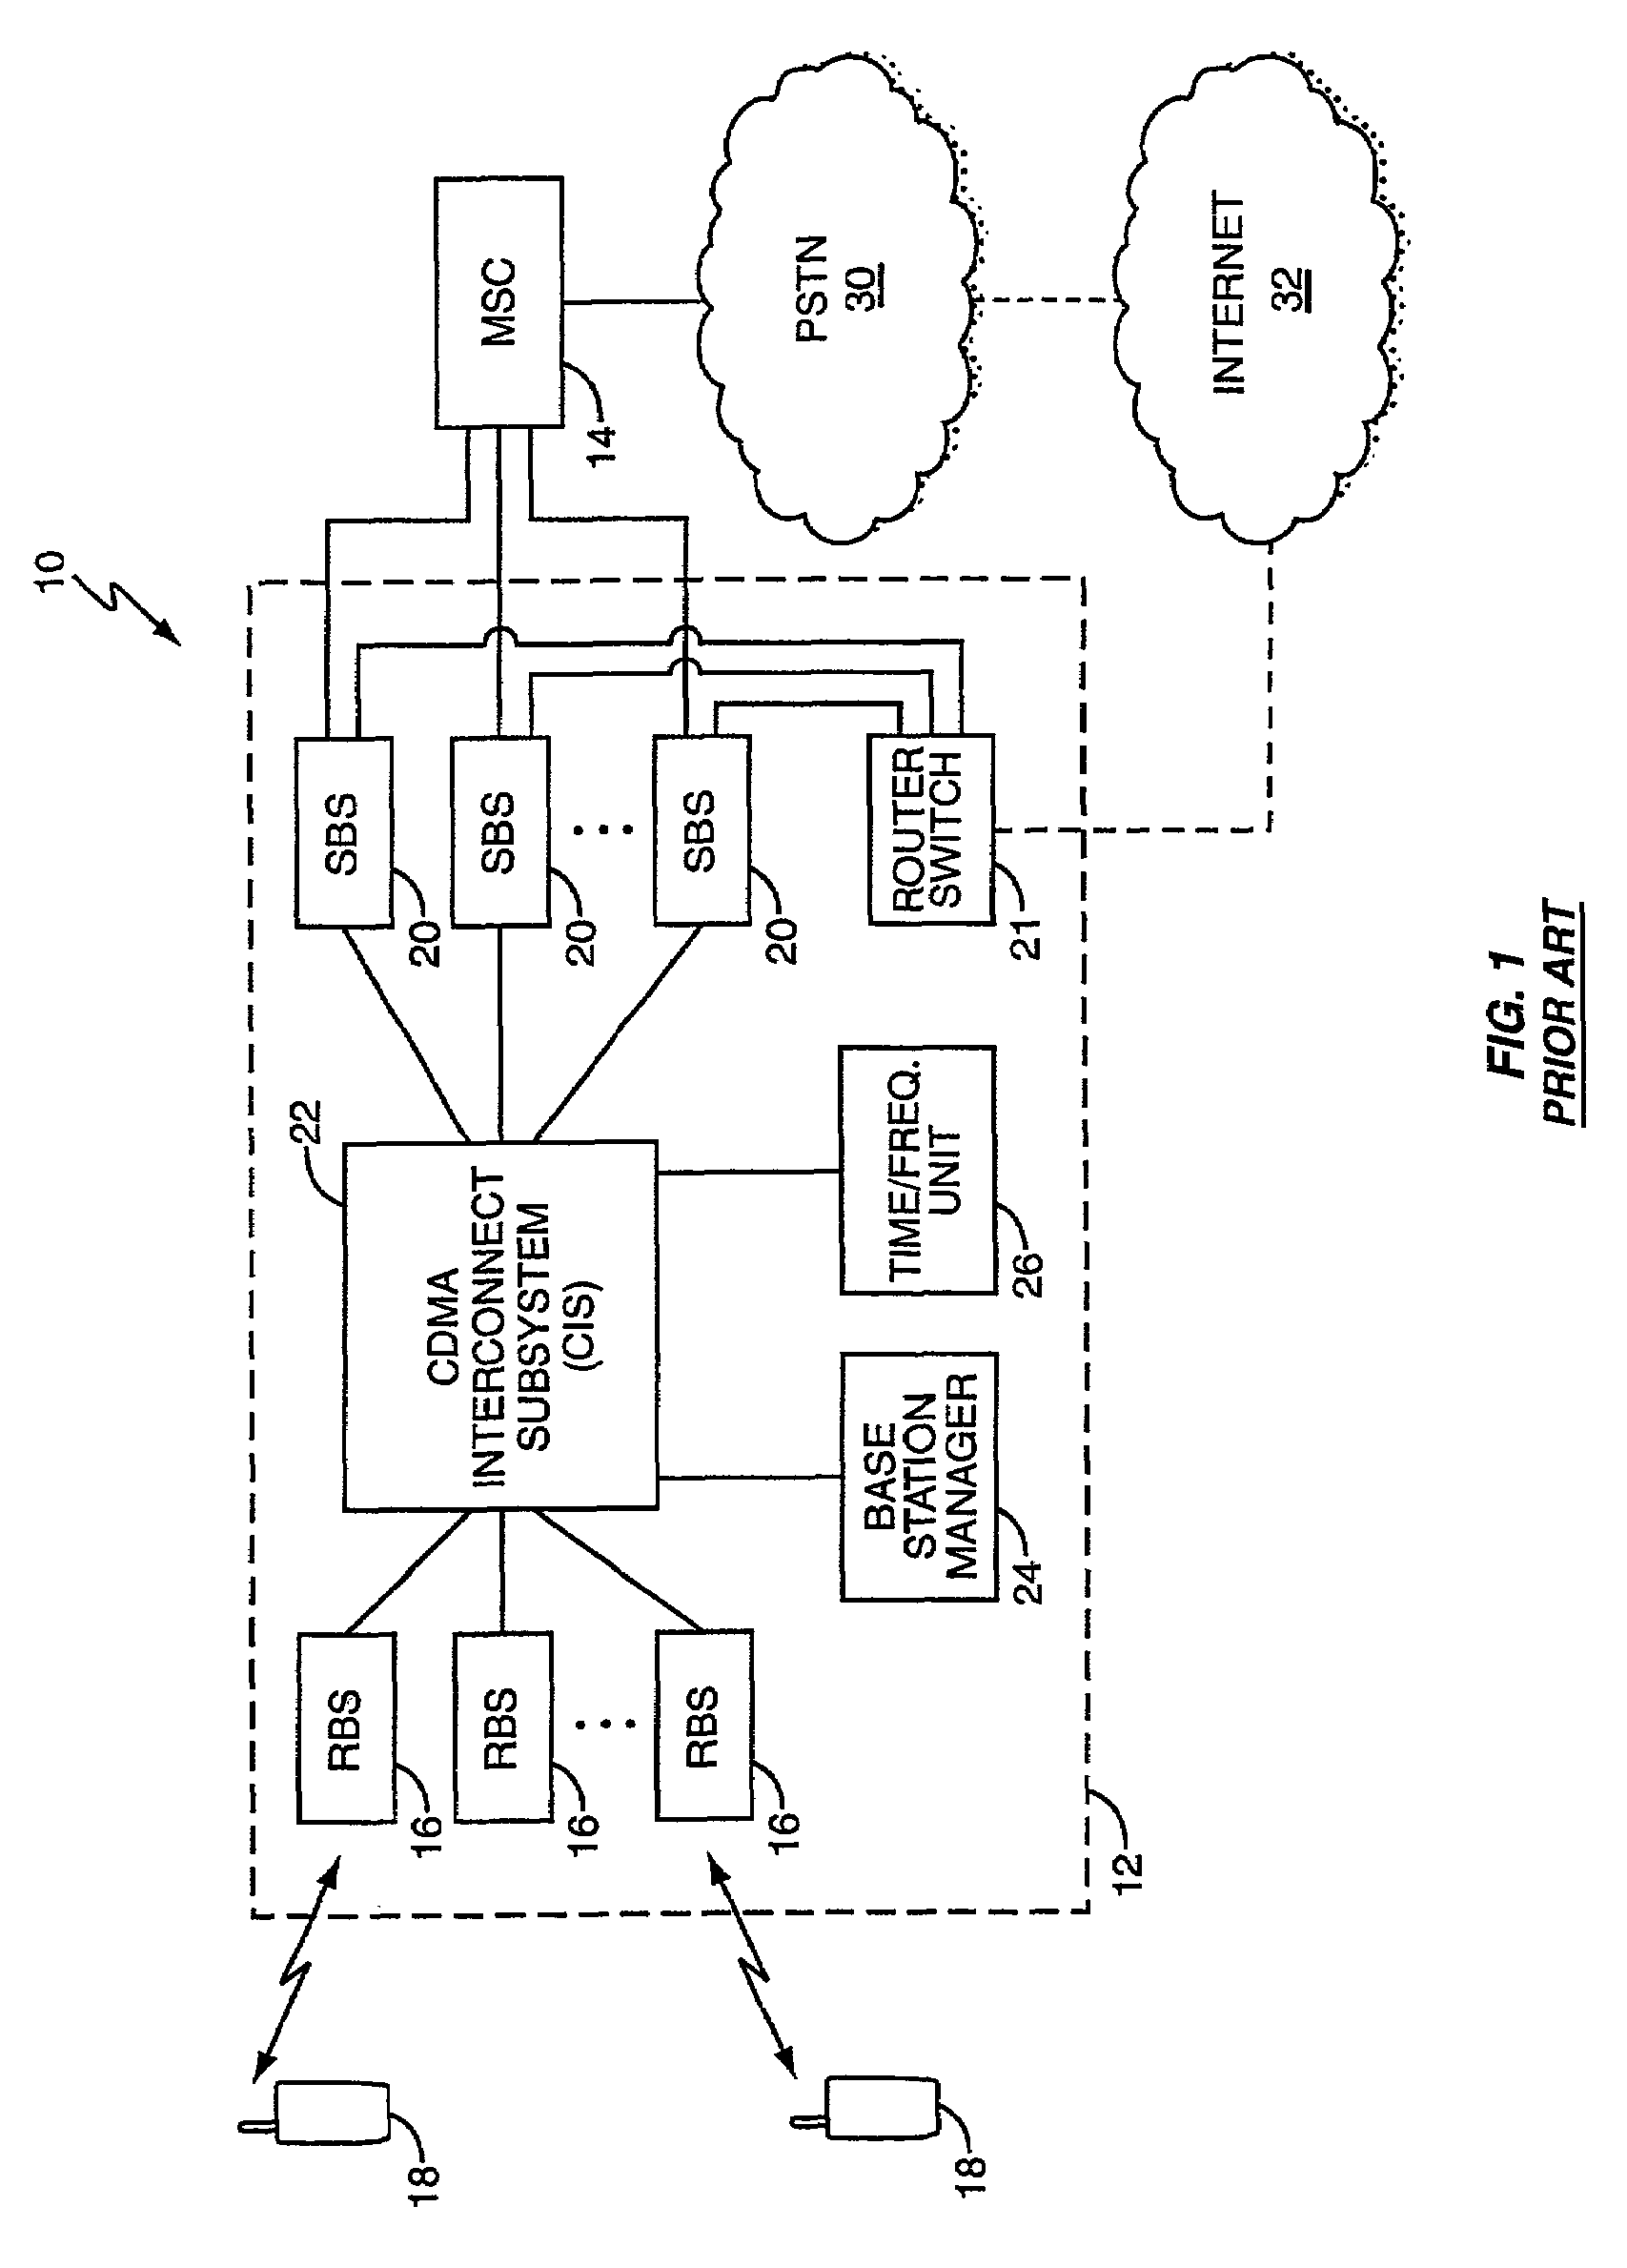 Robust radio base station controller architecture